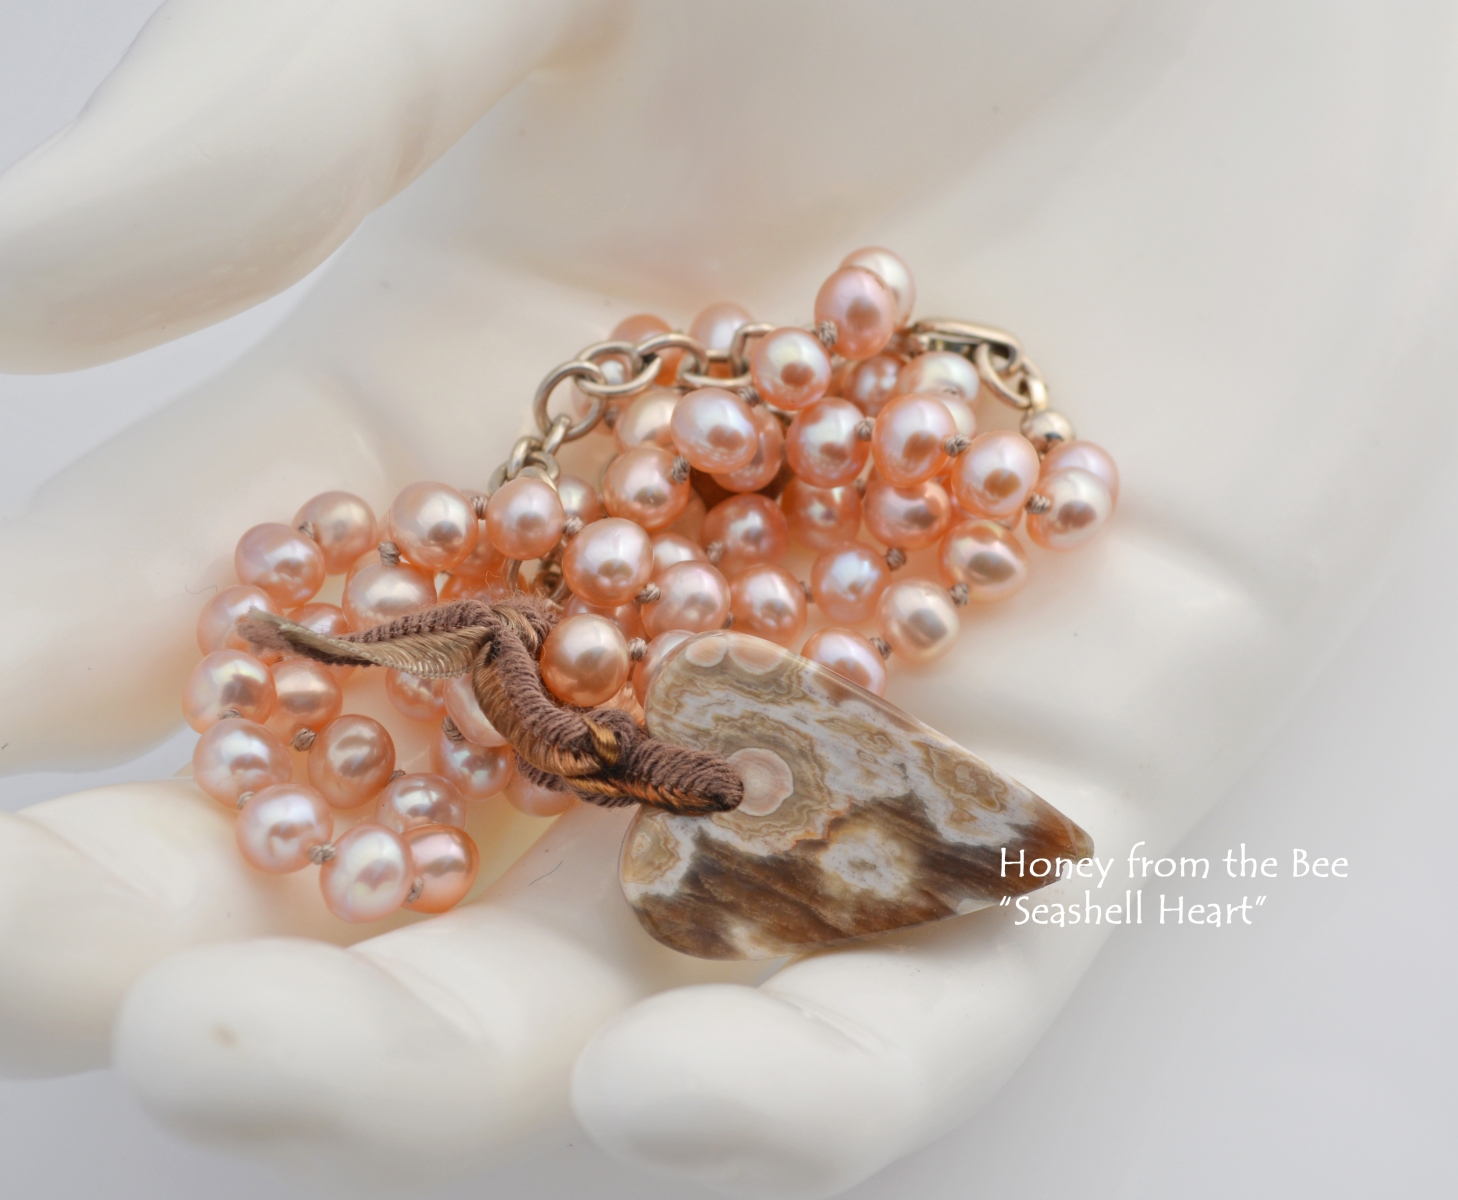 Ocean Jasper heart necklace with pearls by Honey from the Bee